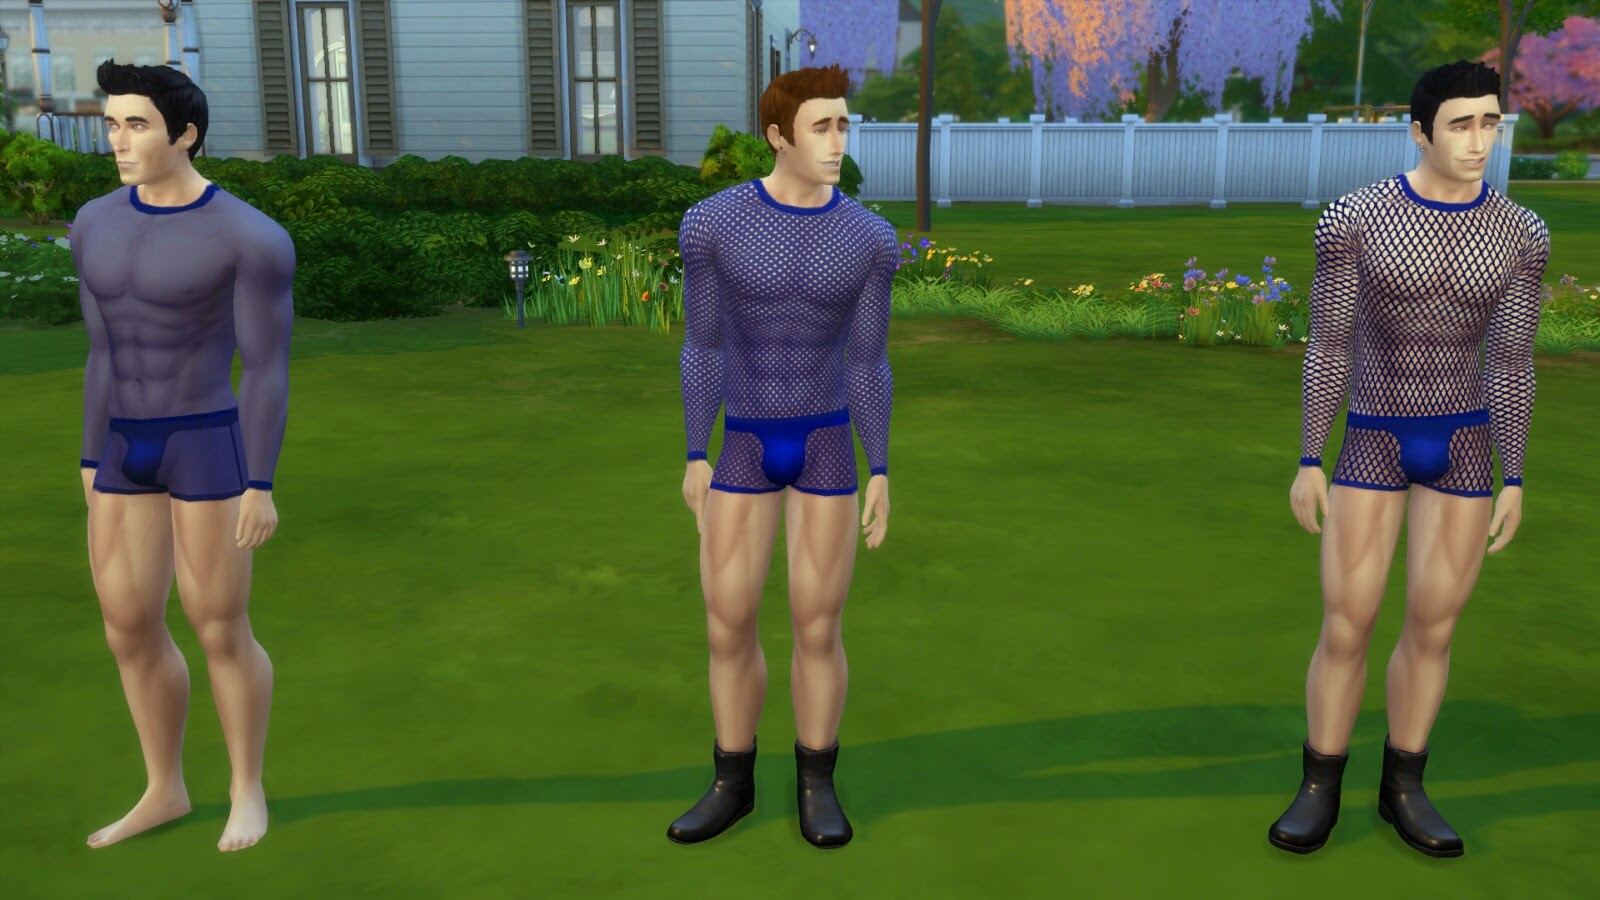 My Sims 4 Blog: Mesh clothing for male Sims - shirts and boxer briefs by li...